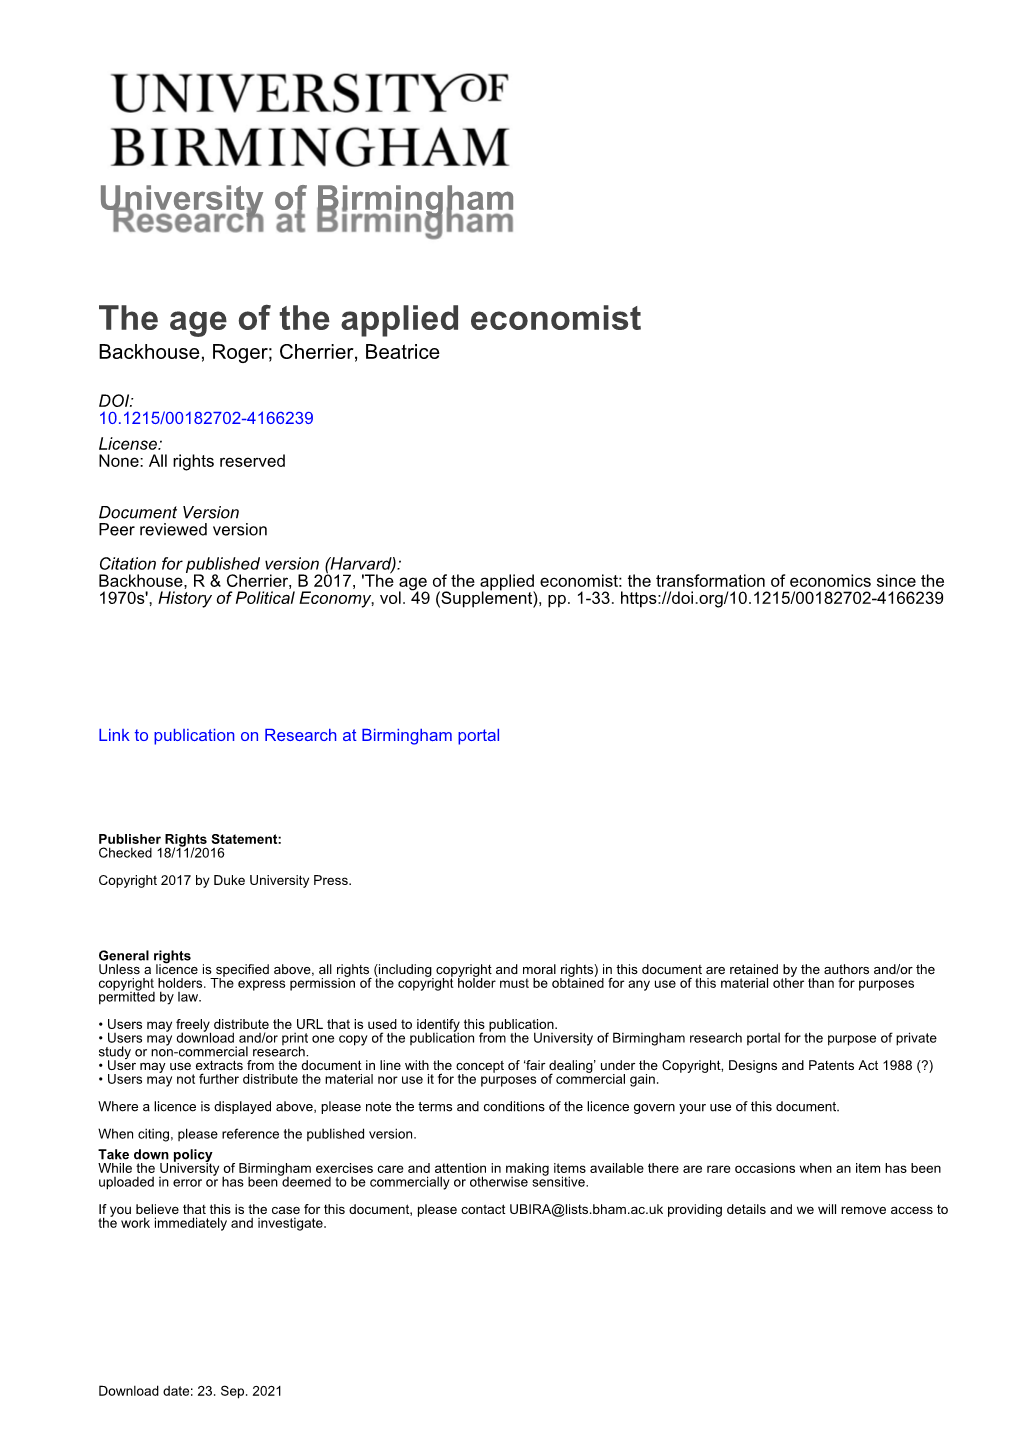 The Age of the Applied Economist Backhouse, Roger; Cherrier, Beatrice